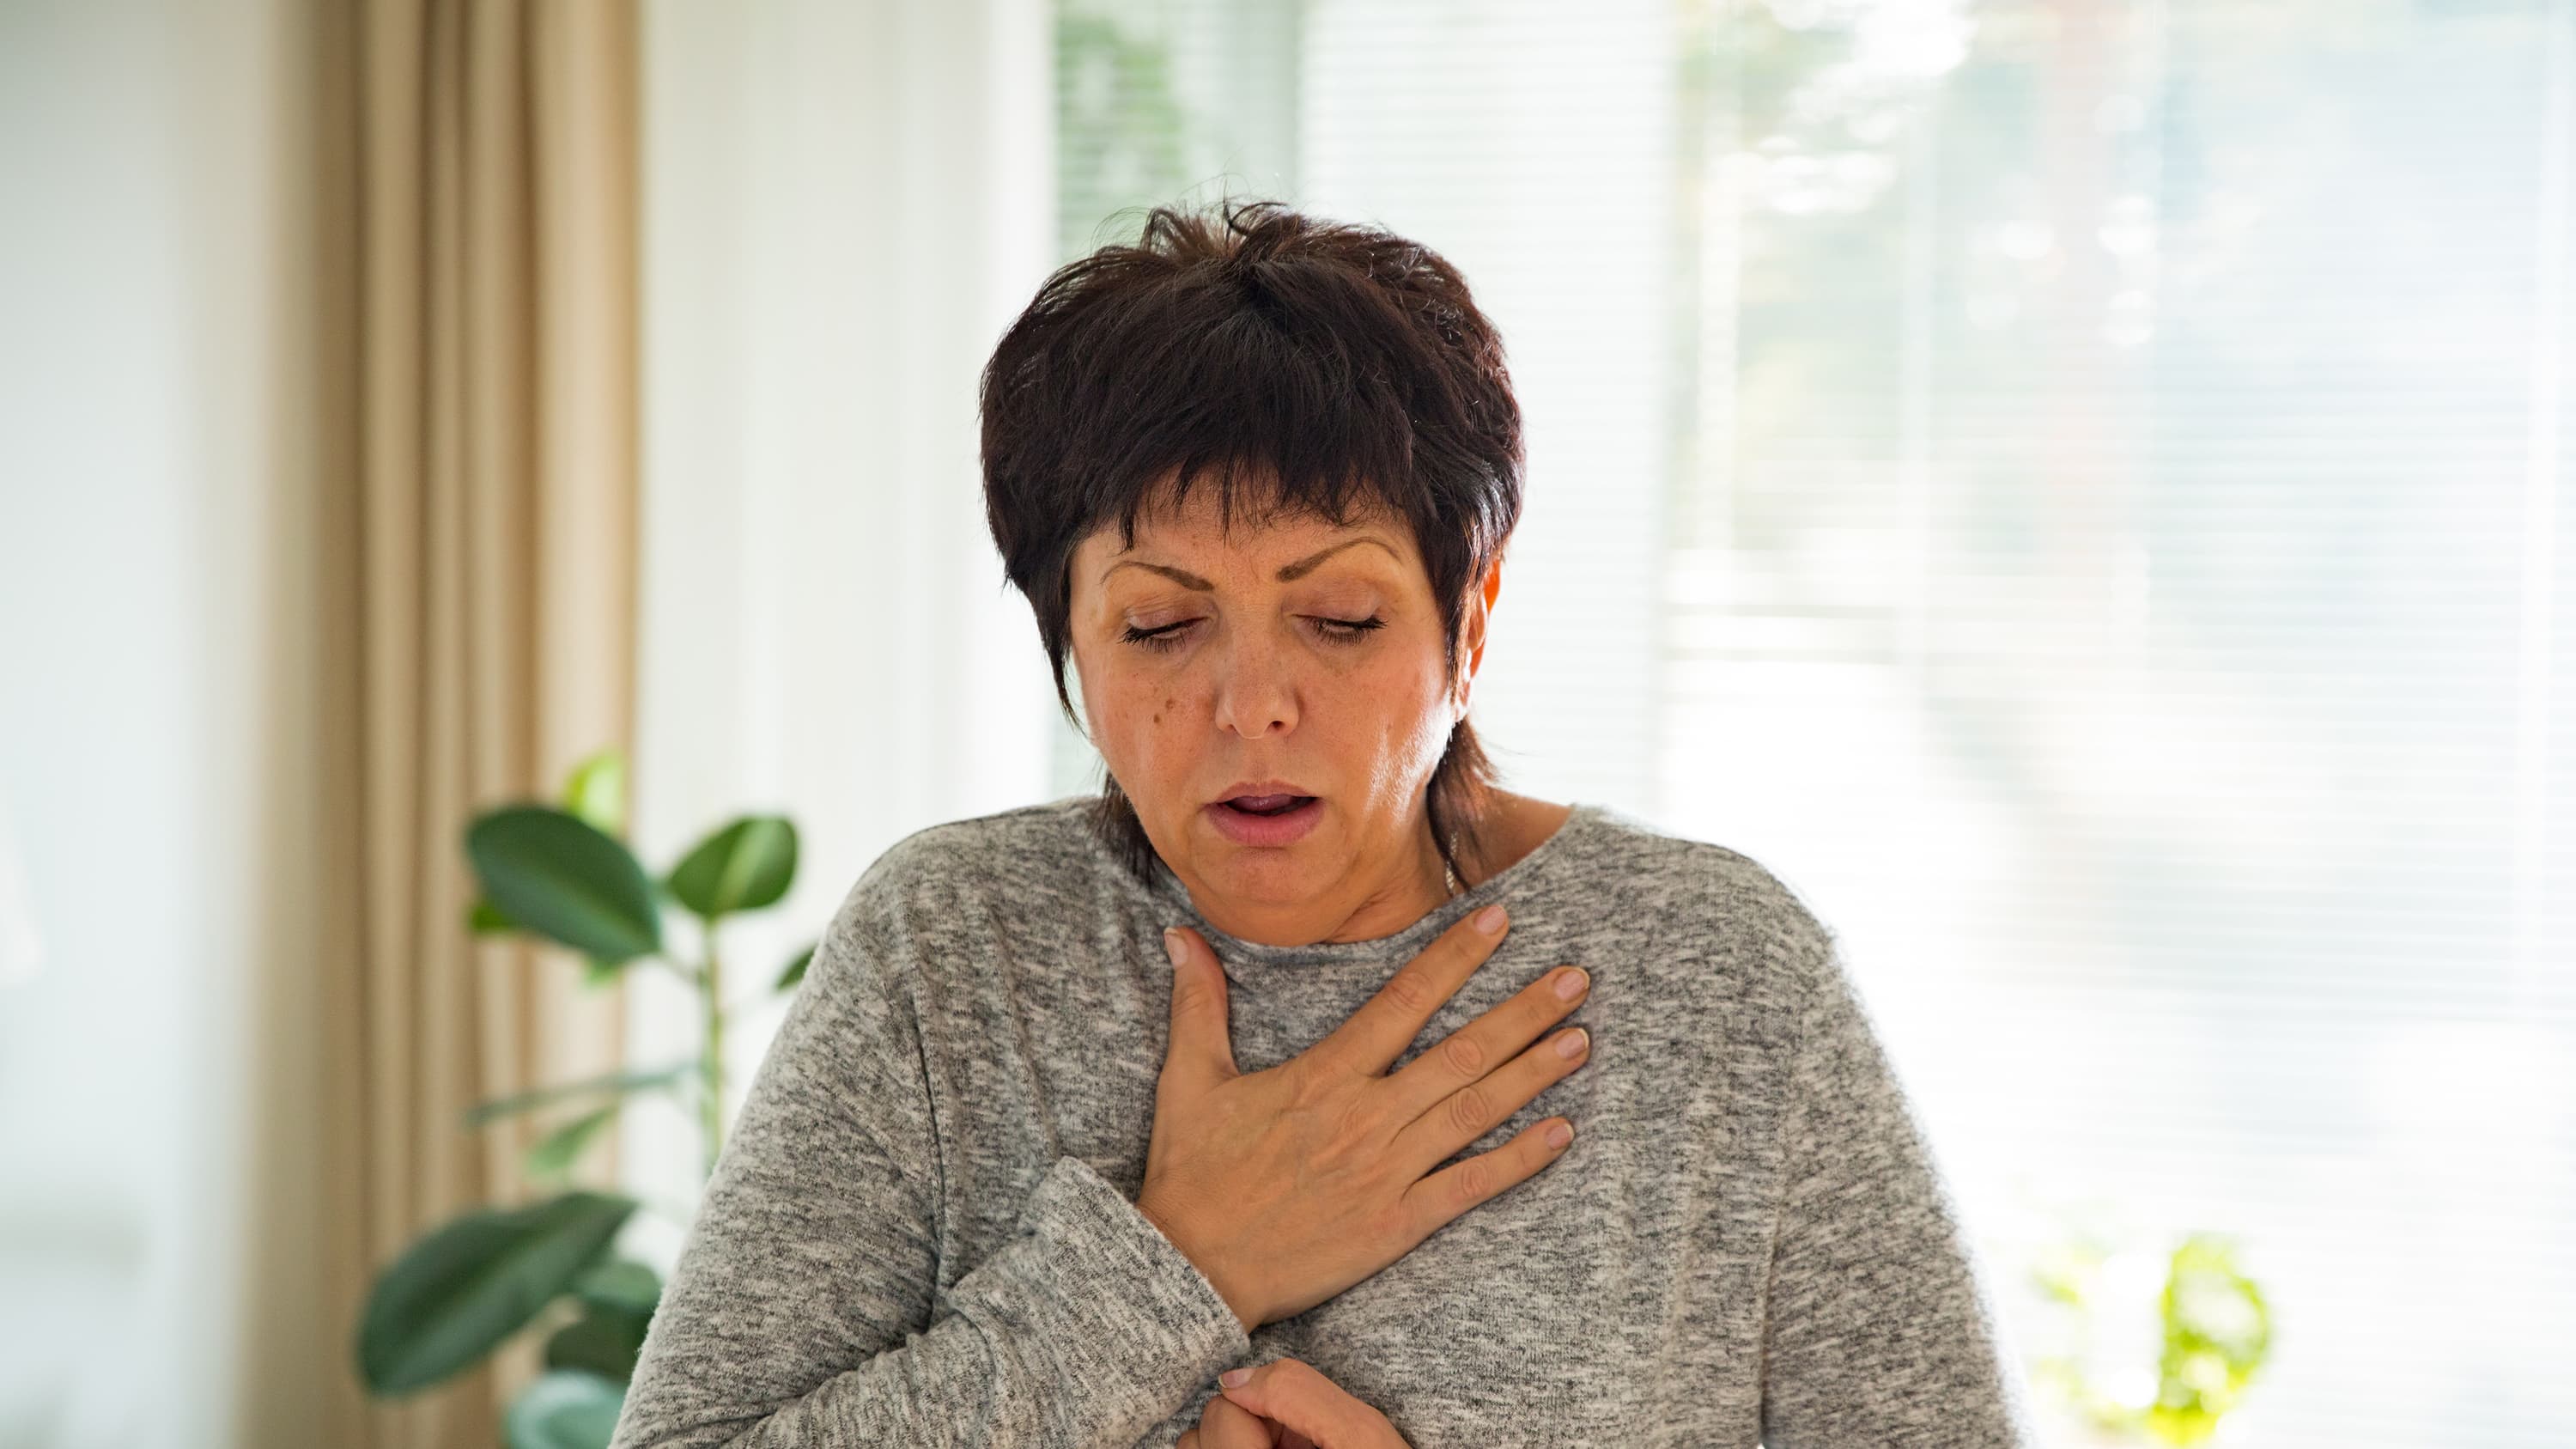 A woman suffering with dypnea struggling to breath.